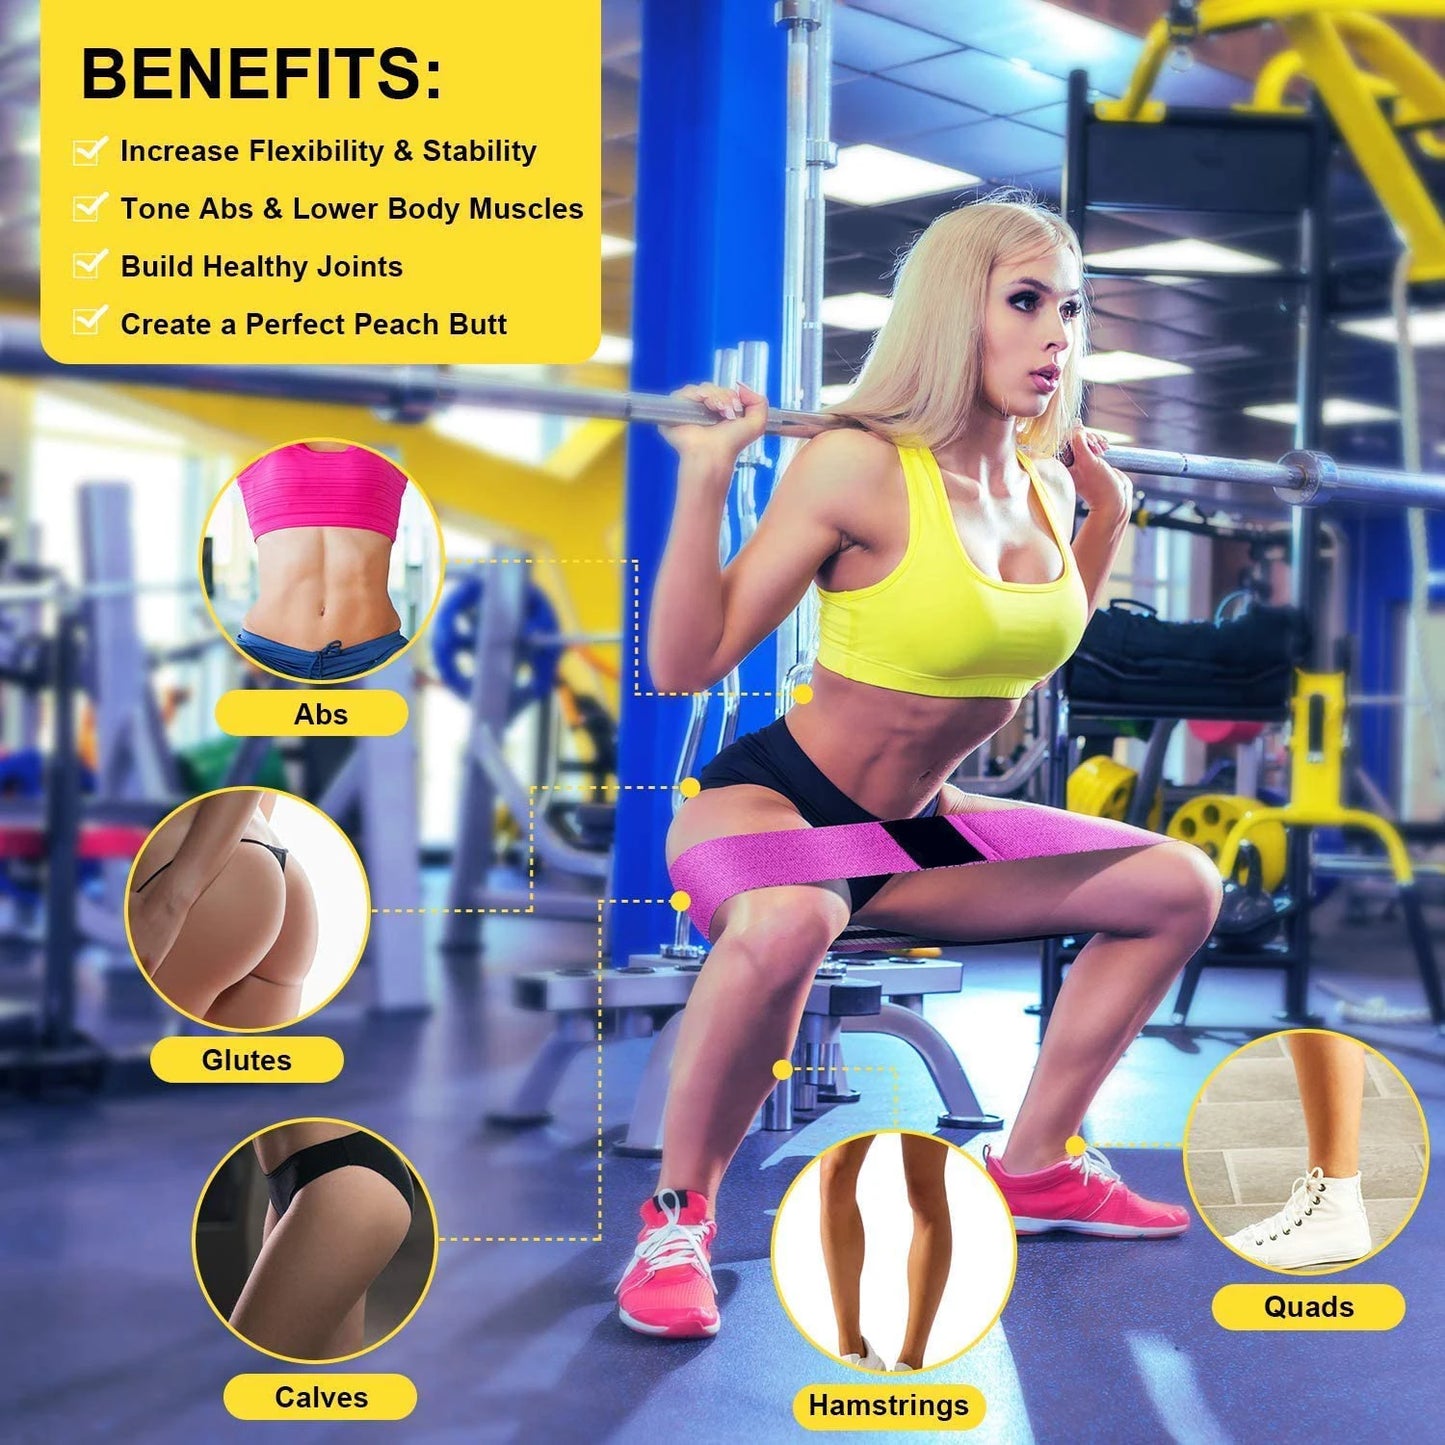 Professional Title: "Premium Elastic Rubber Resistance Bands Set for Yoga, Hip Circle Expander, Gym, and Home Workout - Includes 3 Pieces"